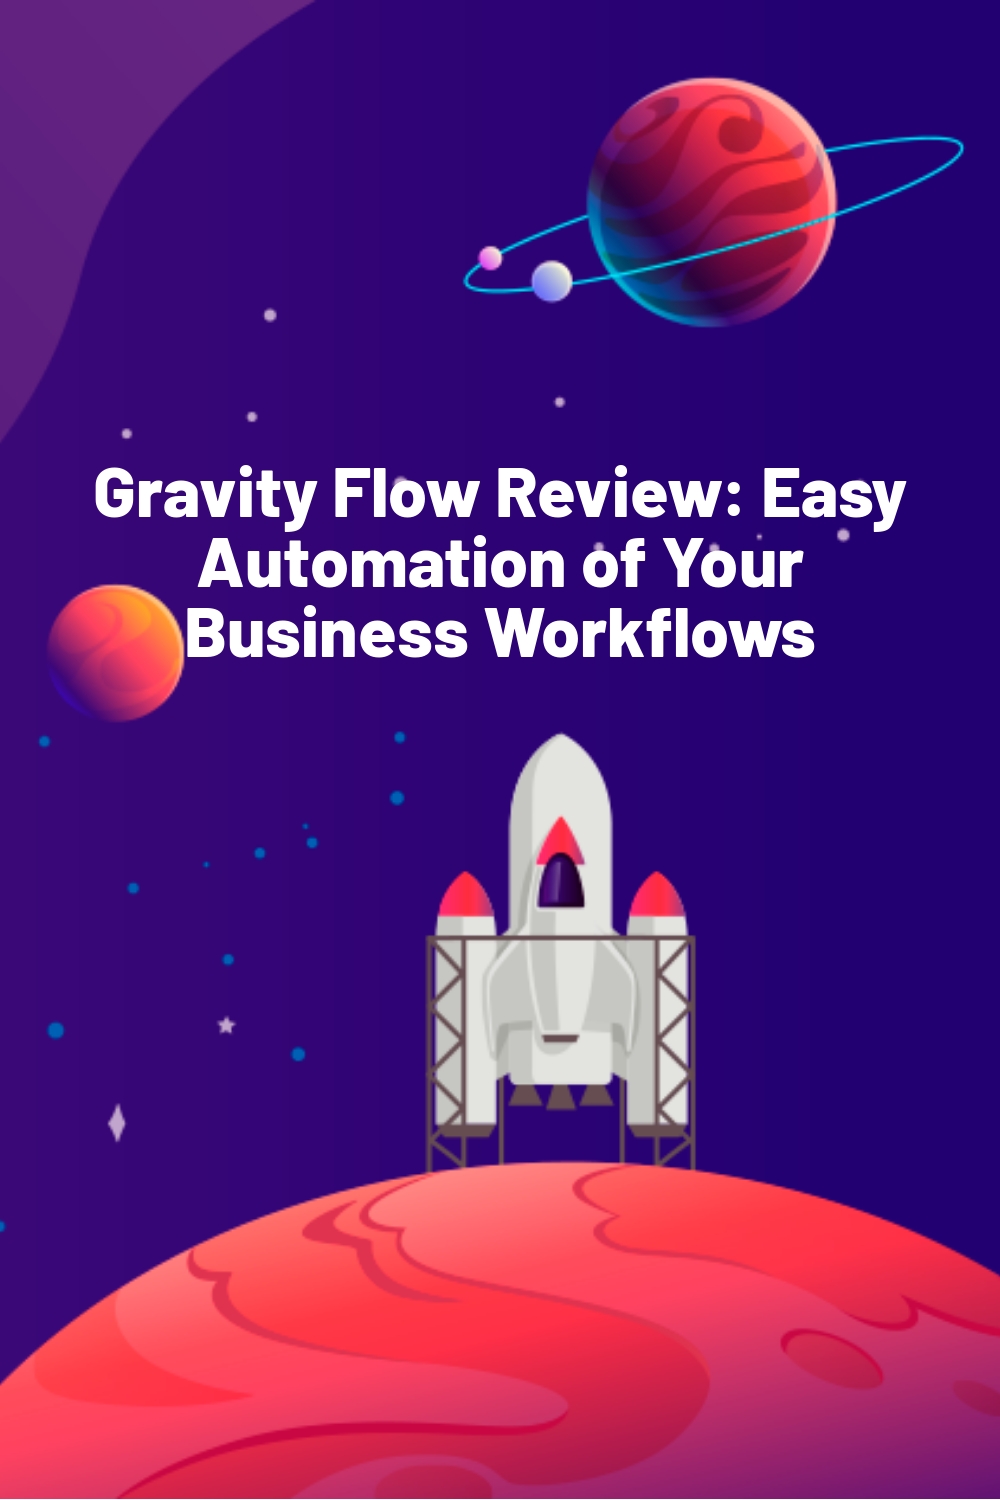 Gravity Flow Review: Easy Automation of Your Business Workflows